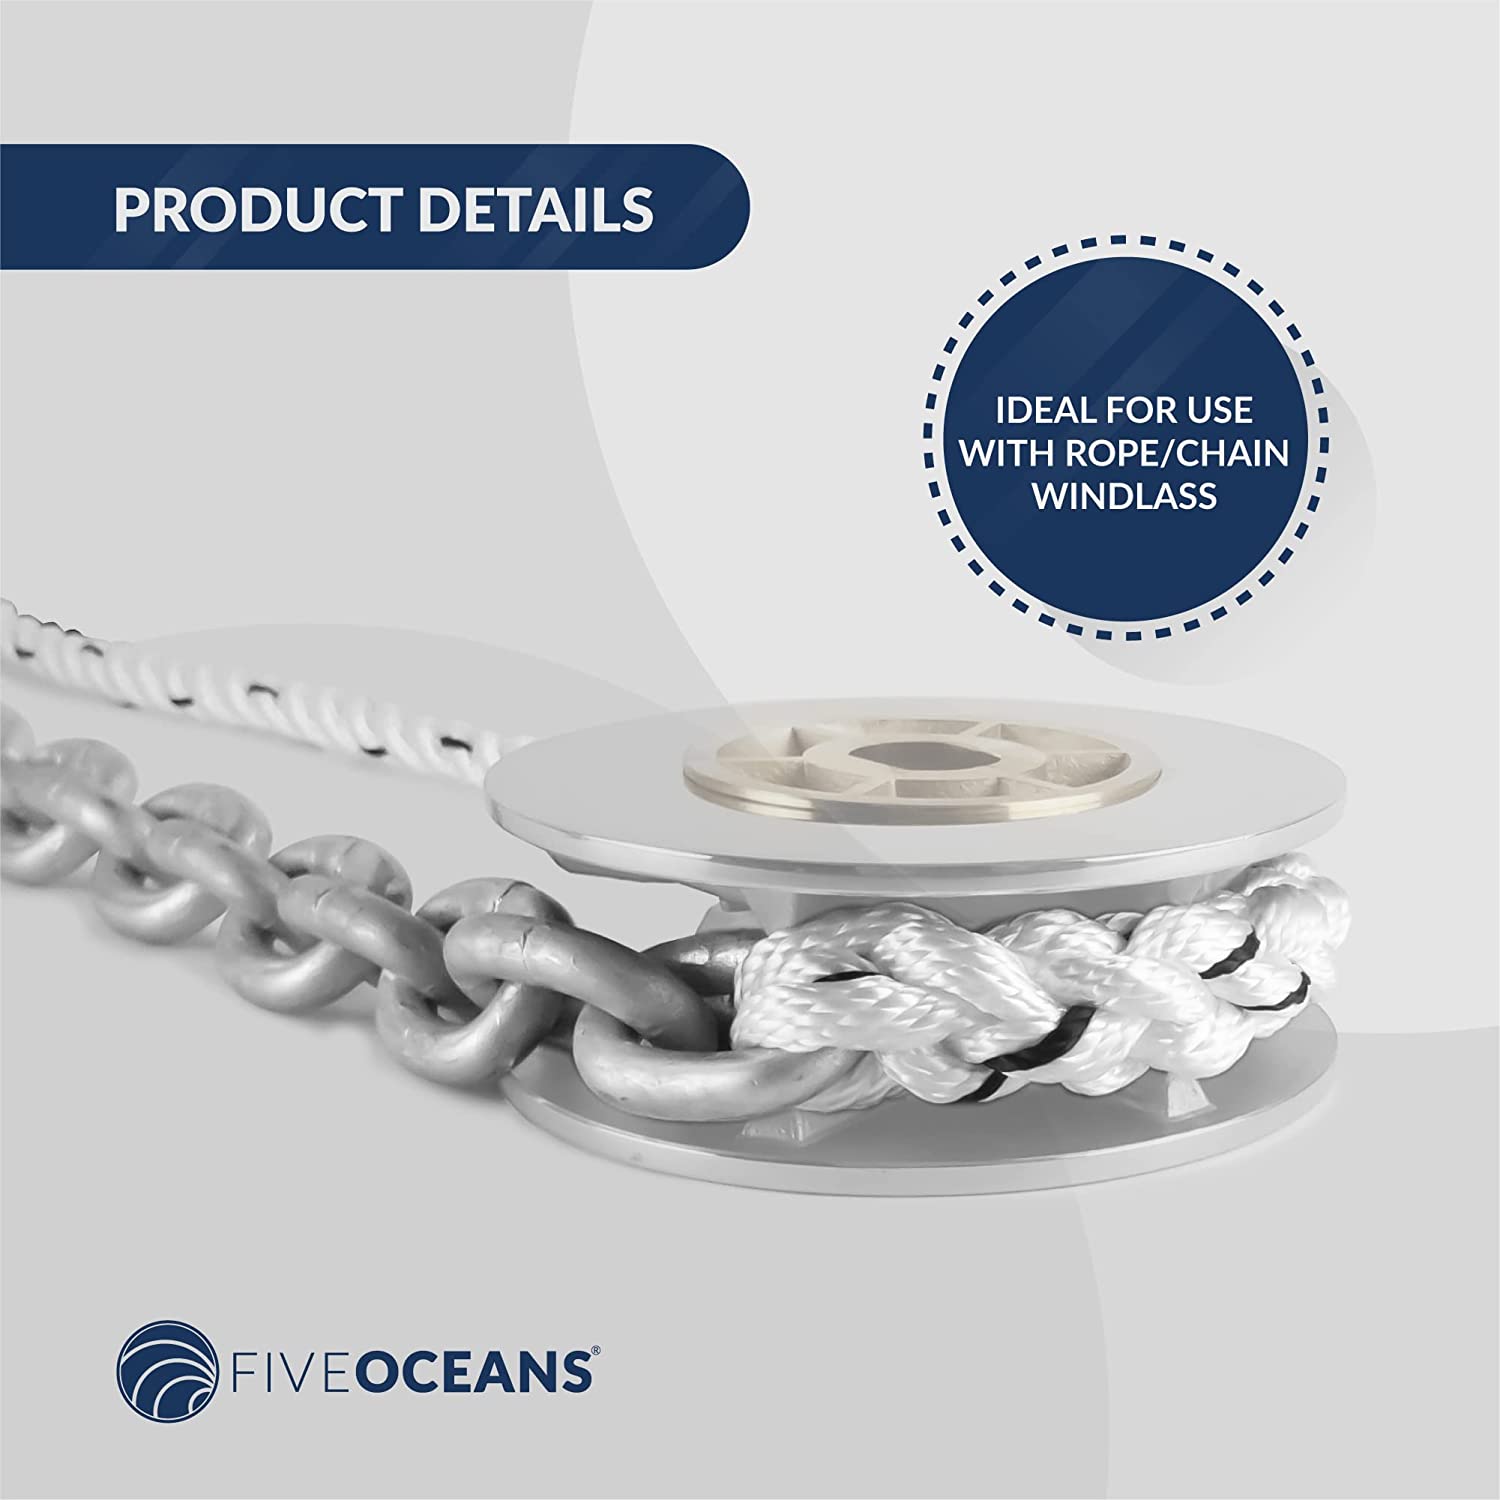 Nylon Three Strand Windlass Rope 9/16"x150FT w/ Calibrated Galvanized 5/16"x20FT HT G4 Chain, Pre-Spliced - Five Oceans-Canadian Marine &amp; Outdoor Equipment